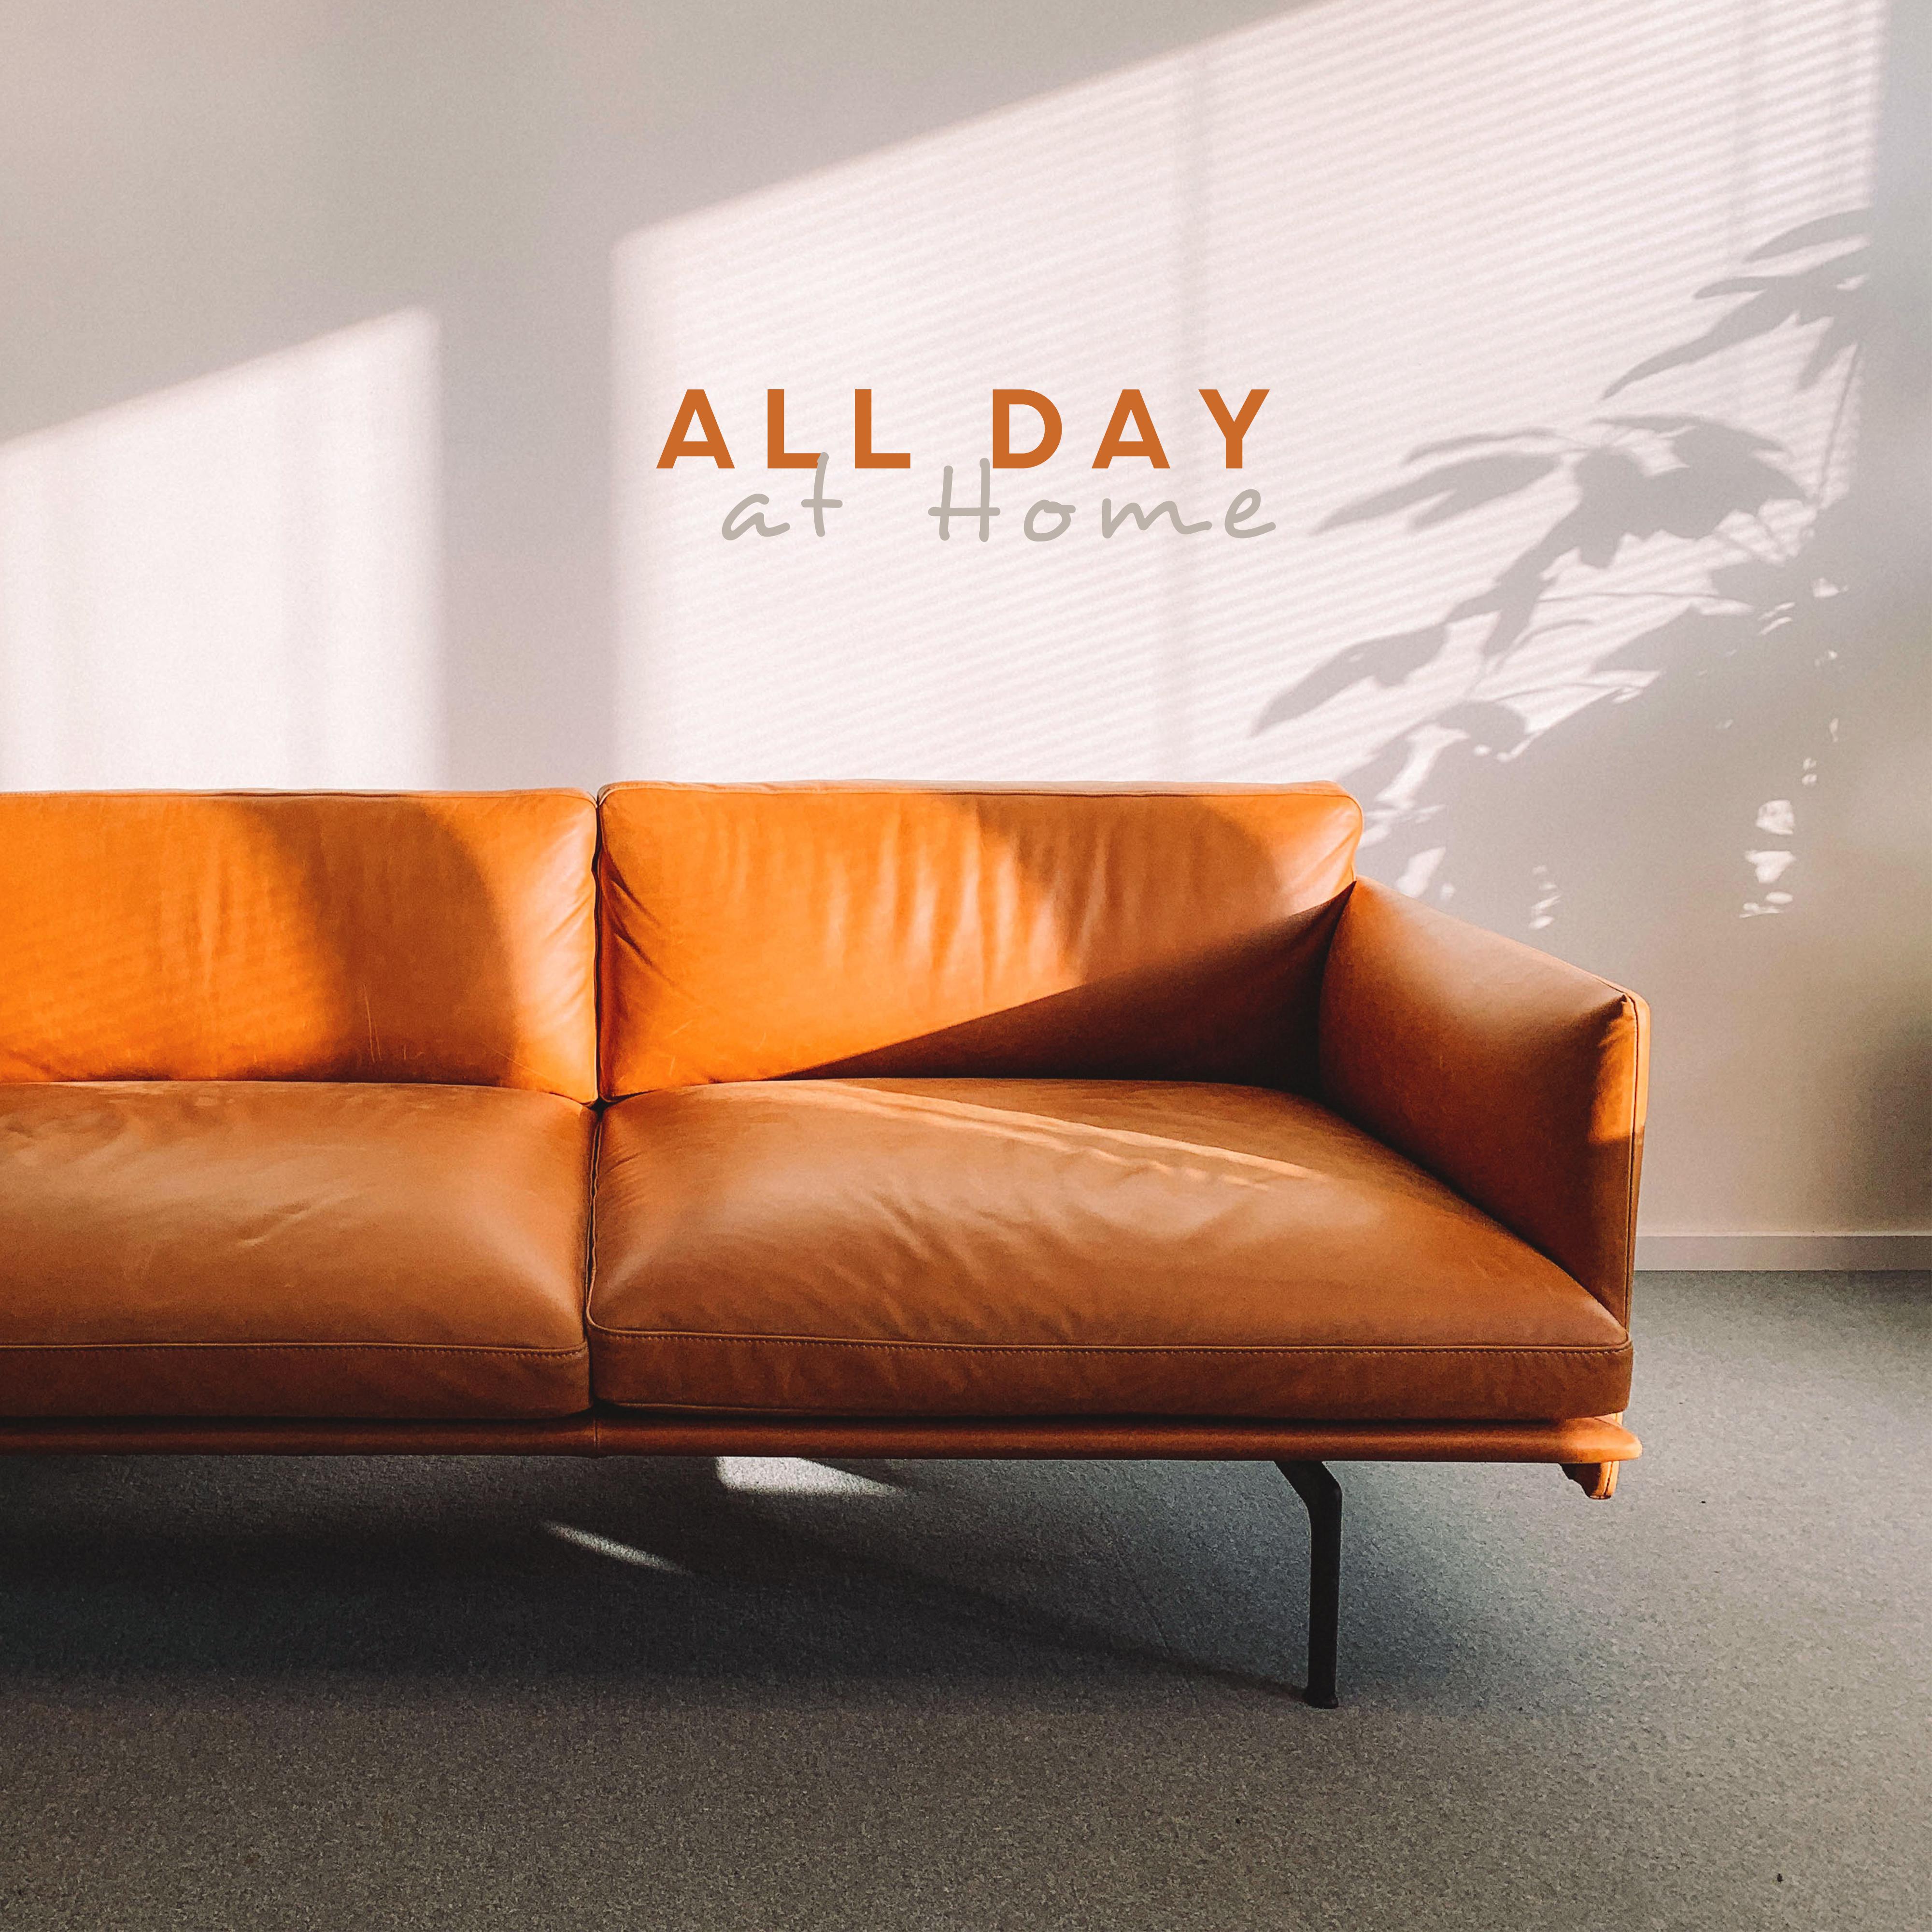 All Day at Home: 15 Instrumental Smooth Jazz Songs for Perfect Relaxation with Love at Home, Fresh Music 2019